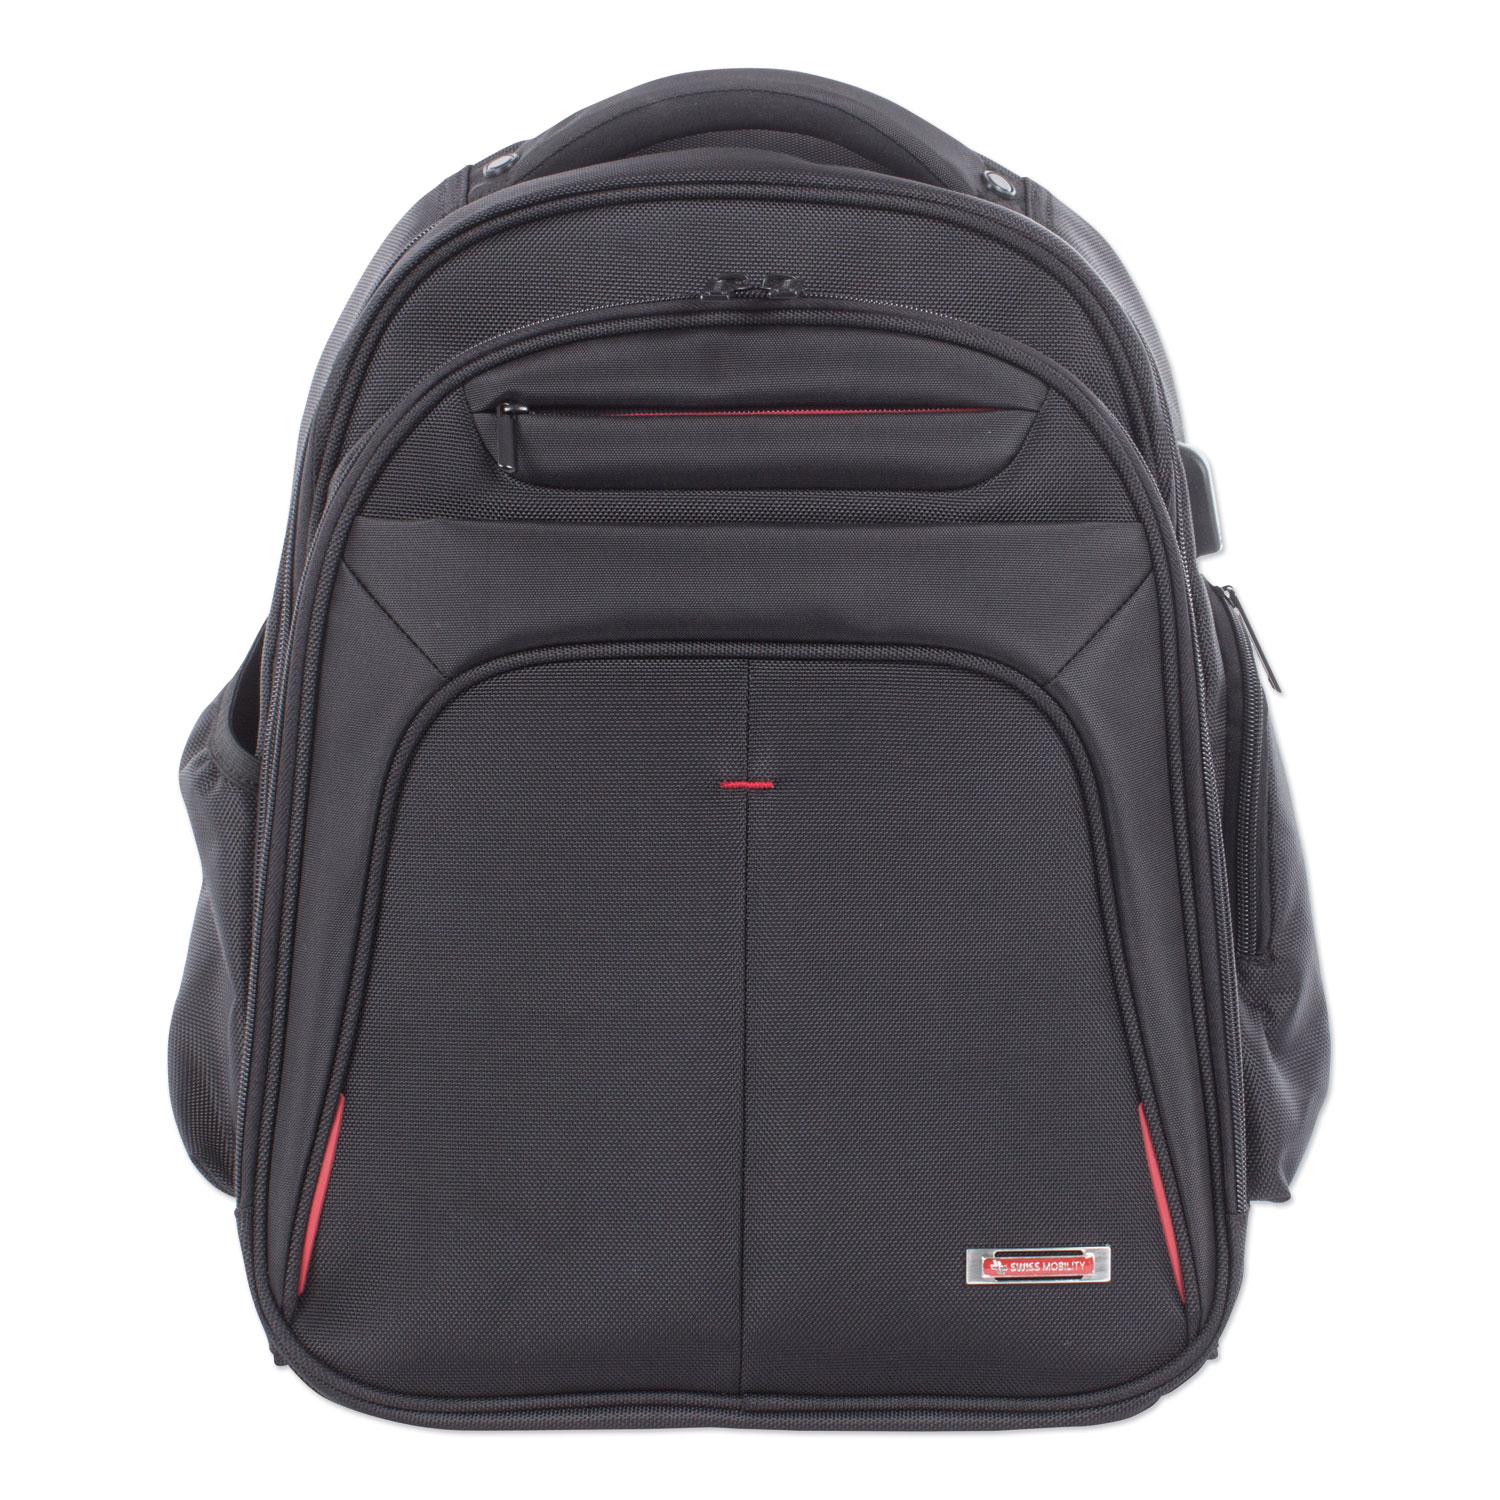  Swiss Mobility BKP1000SMBK Purpose 2 Section Business Backpack, Laptops 15.6, 8.5 x 8.5 x 19.5, Black (SWZBKP1000SMBK) 